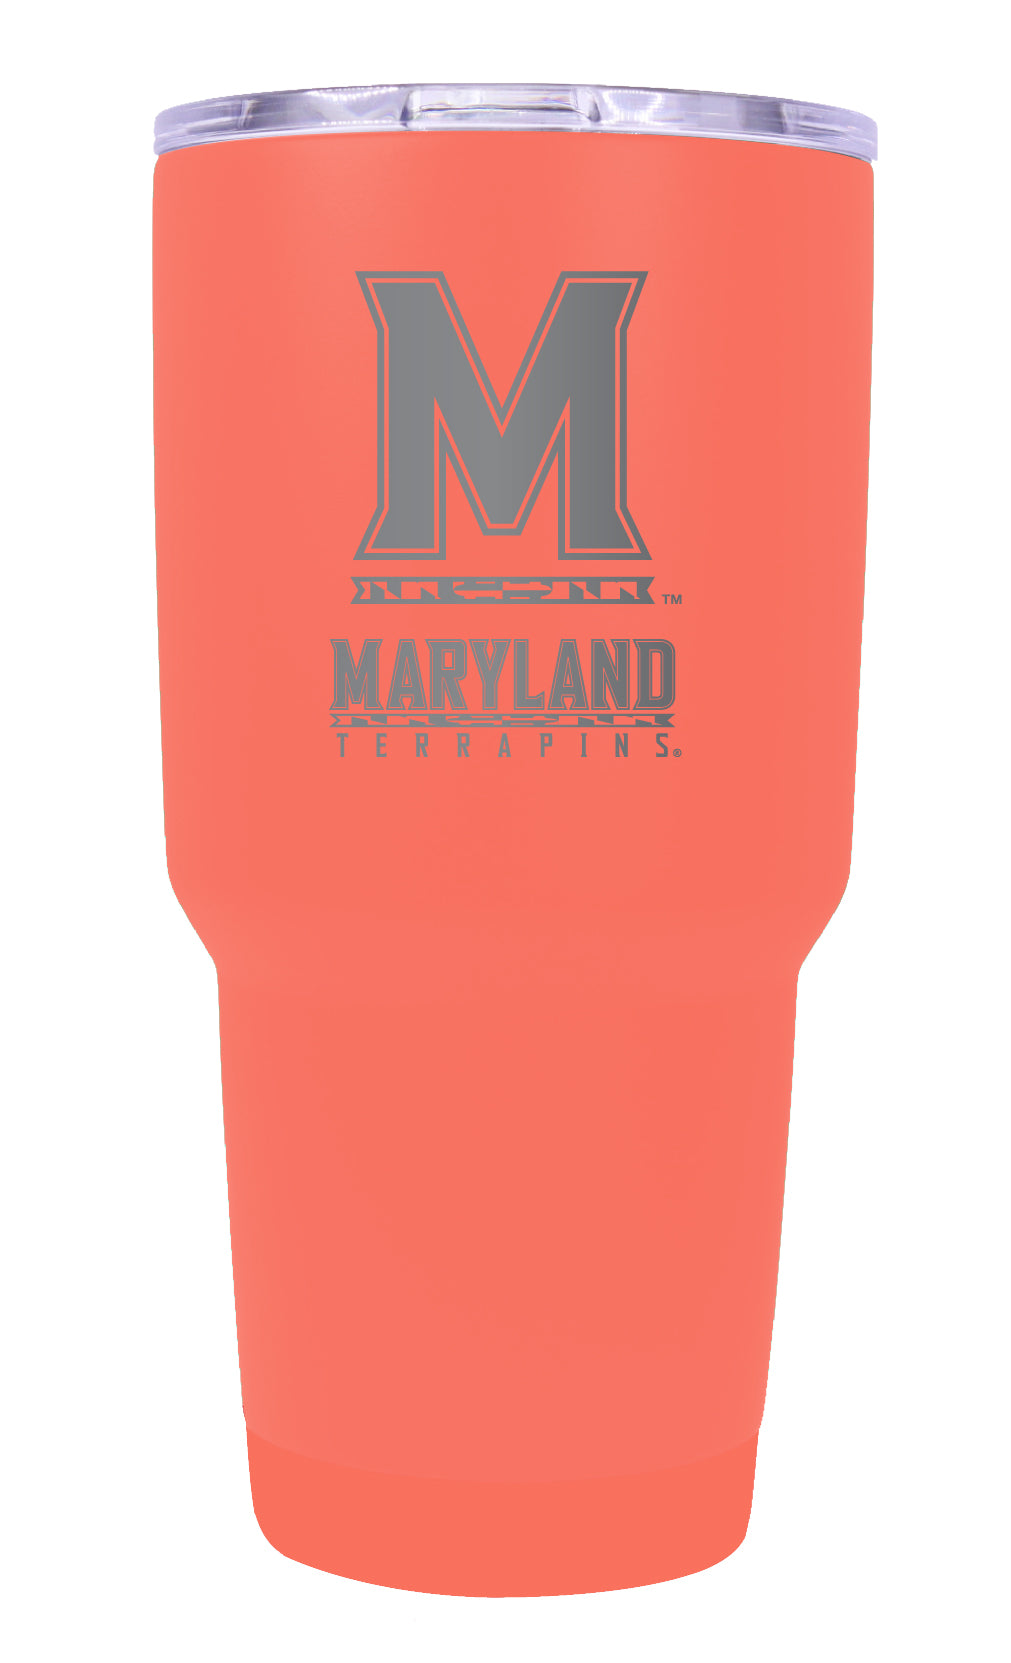 Maryland Terrapins Premium Laser Engraved Tumbler - 24oz Stainless Steel Insulated Mug Choose Your Color